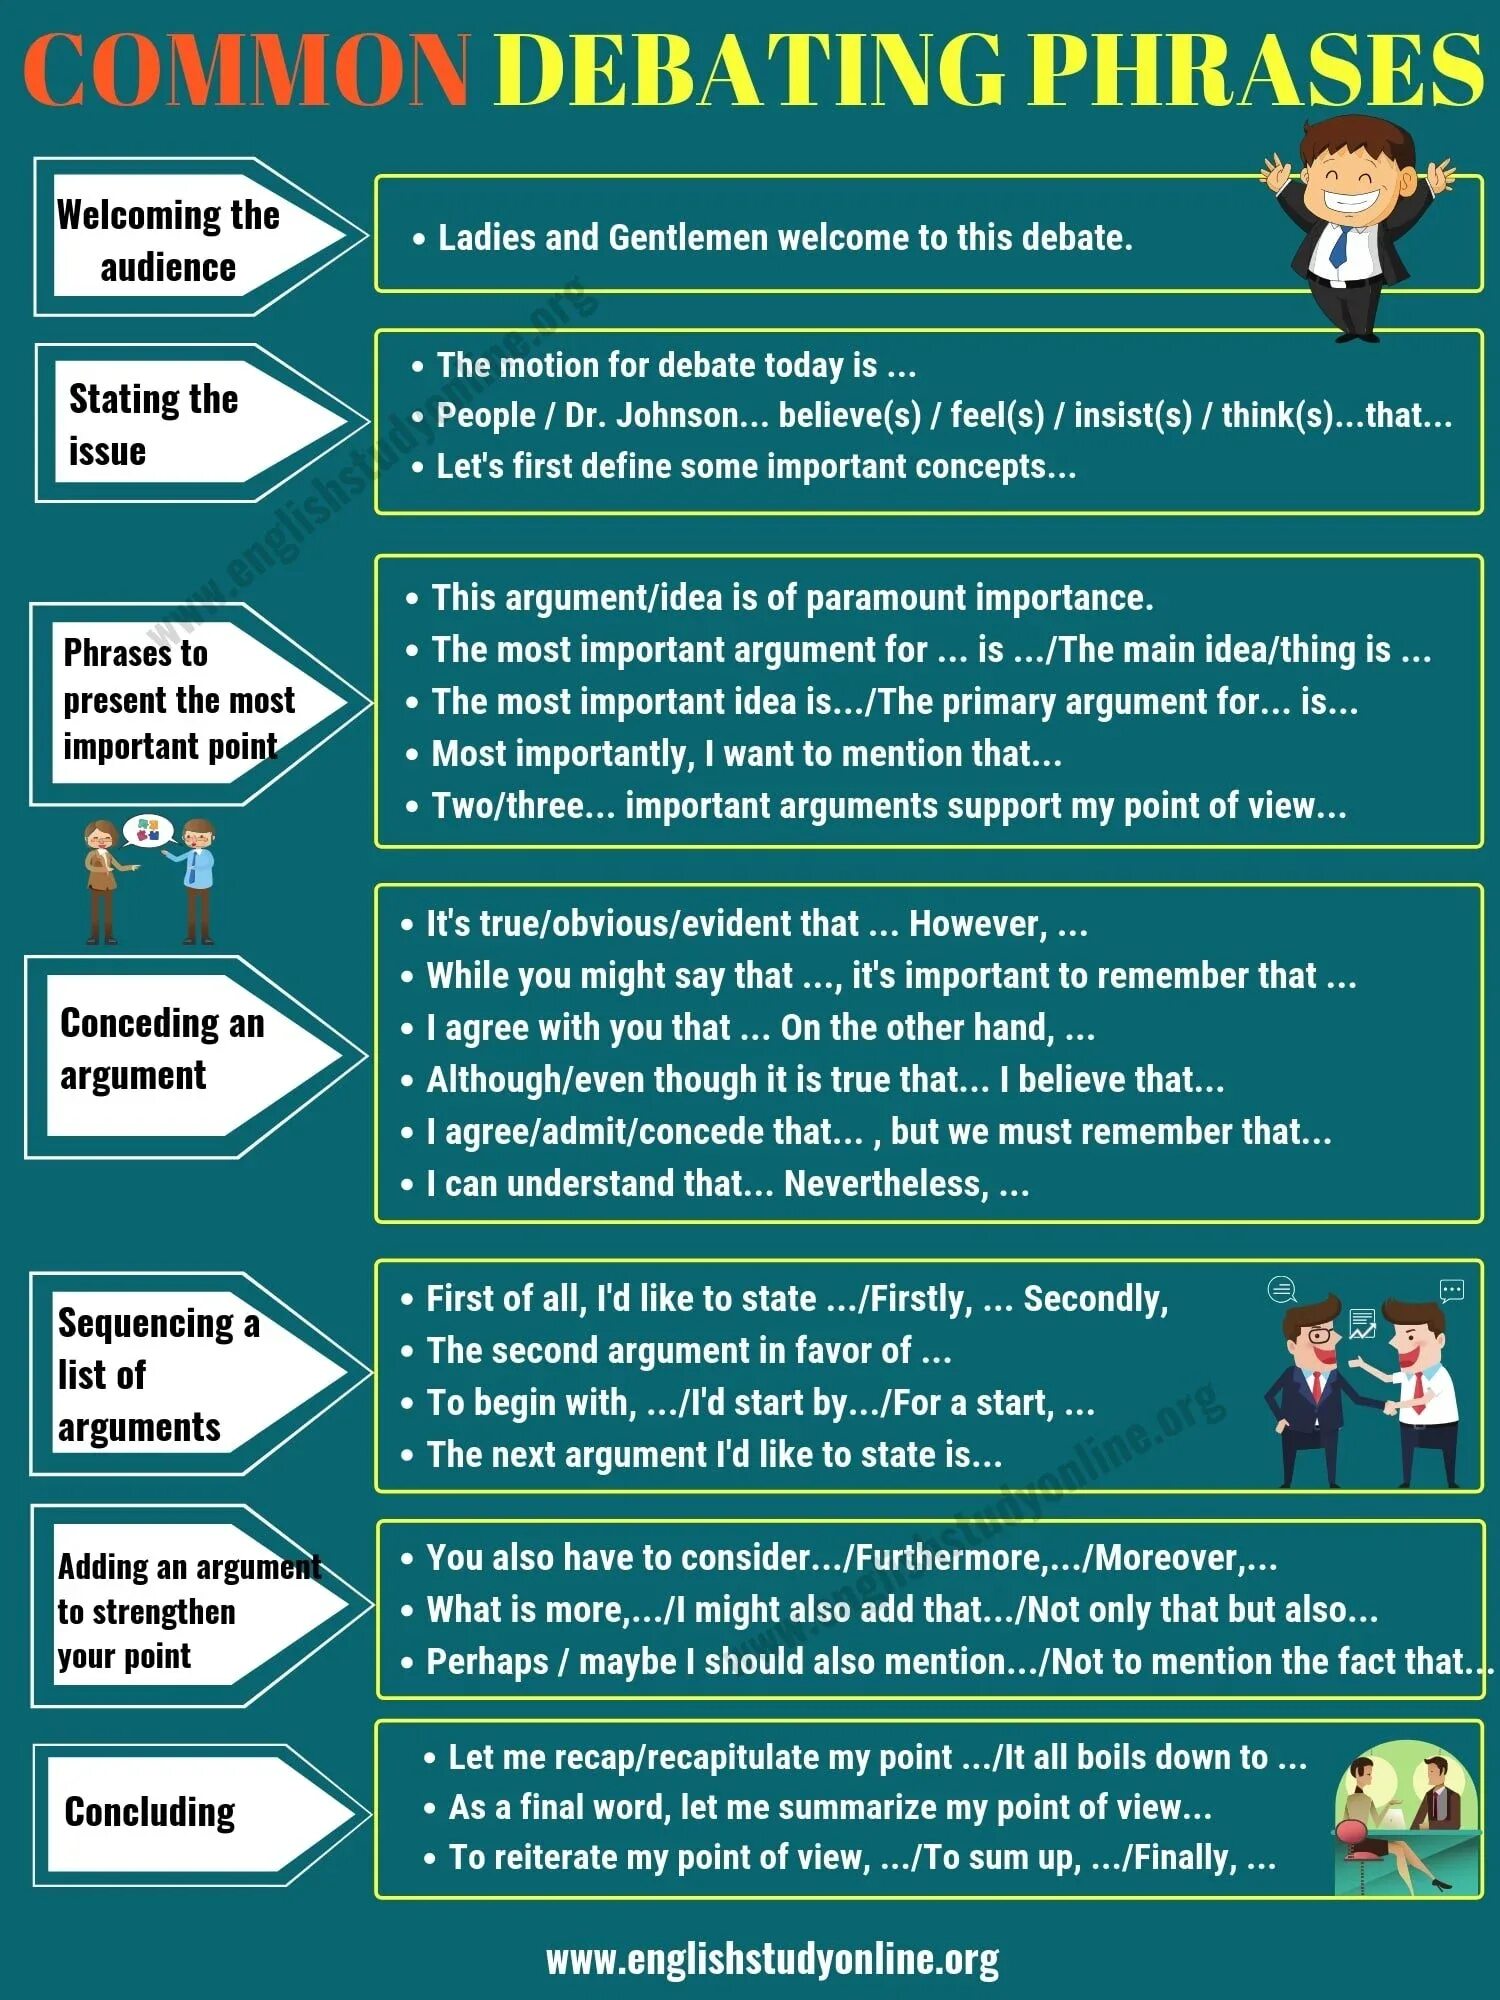 Useful phrases for debates. Debate phrases in English. Useful Vocabulary for debates. Useful phrases for discussion. Spoken expressions